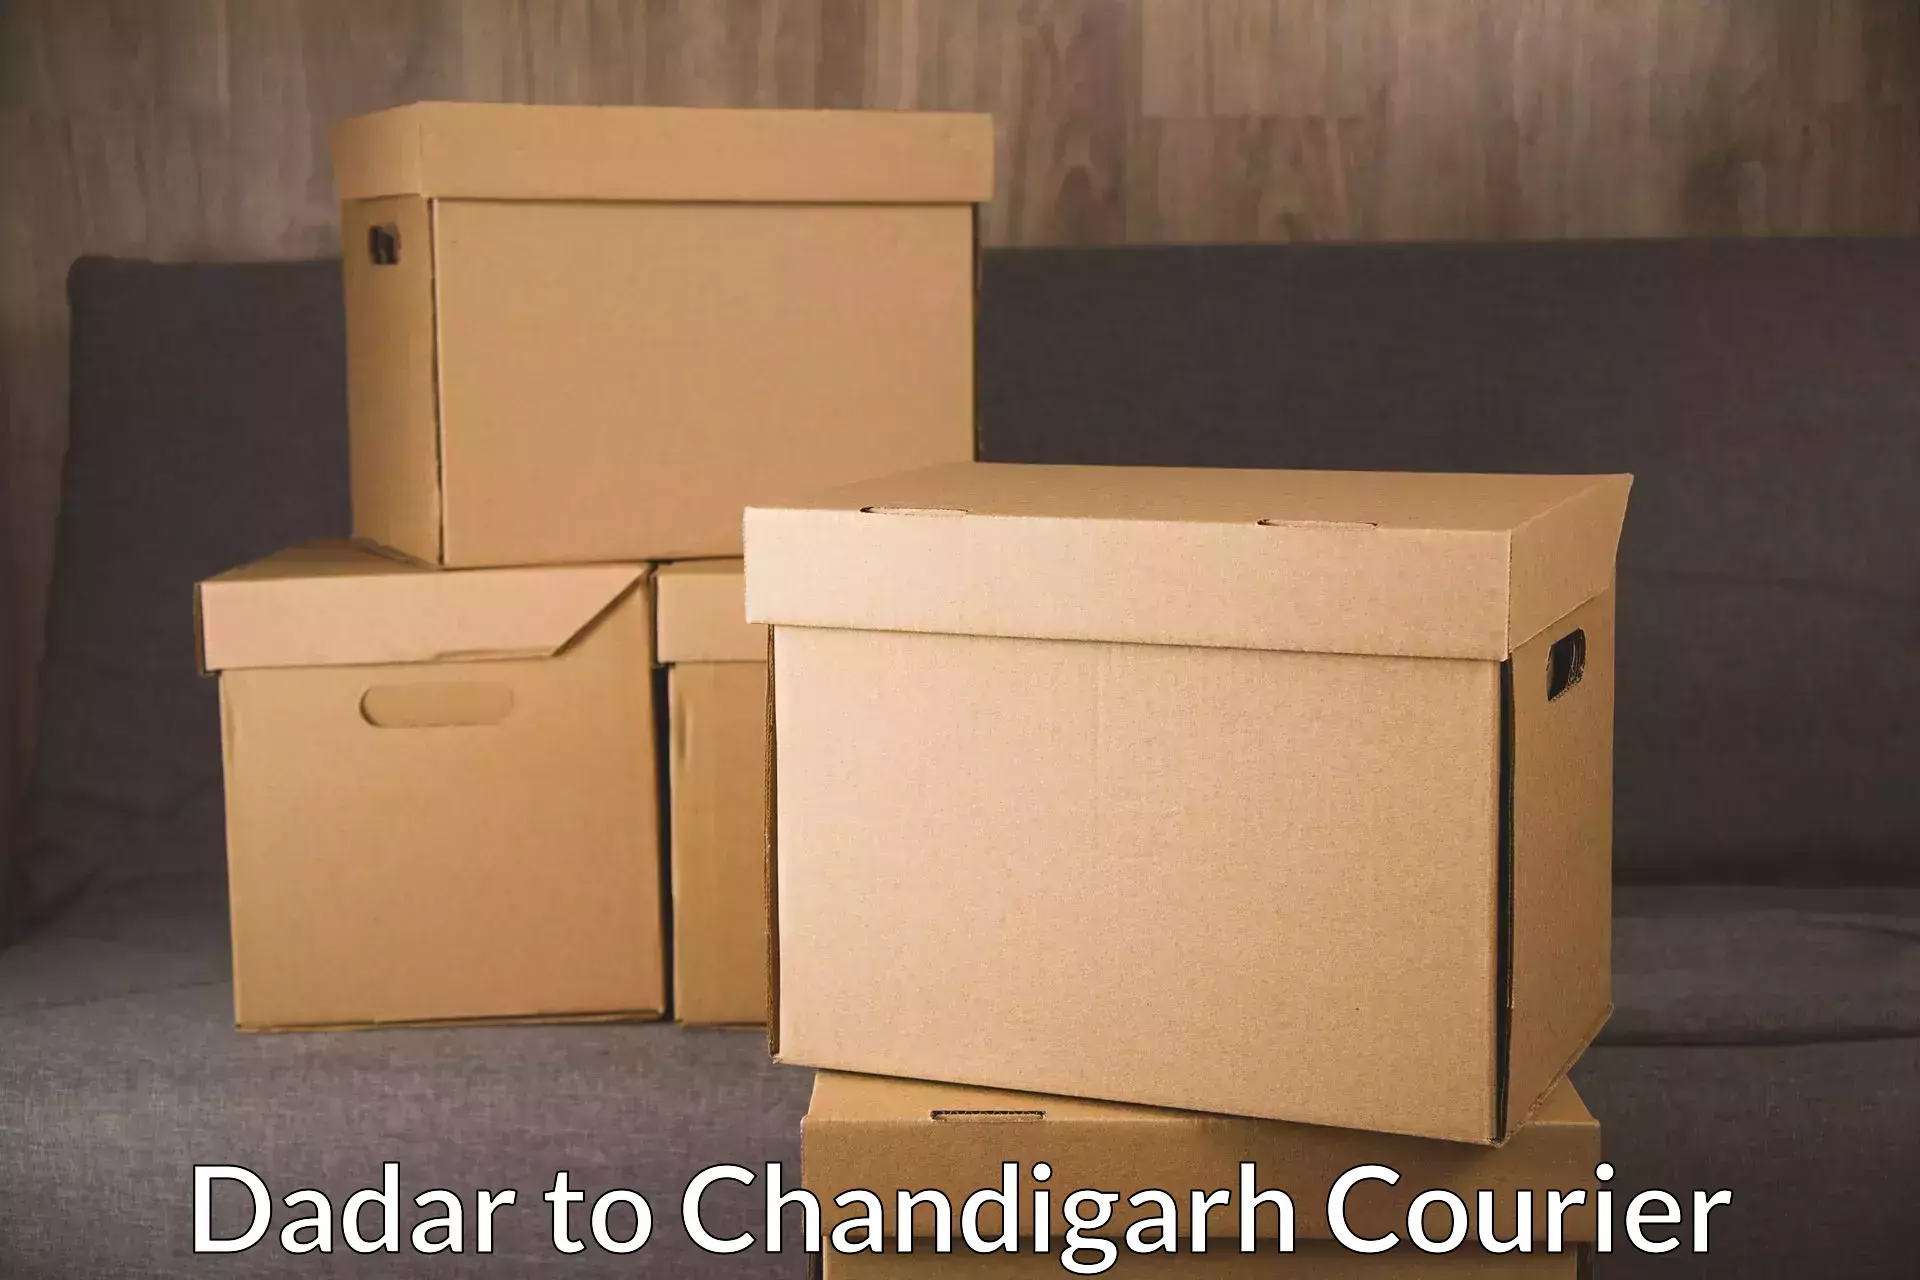 Full-service courier options in Dadar to Chandigarh